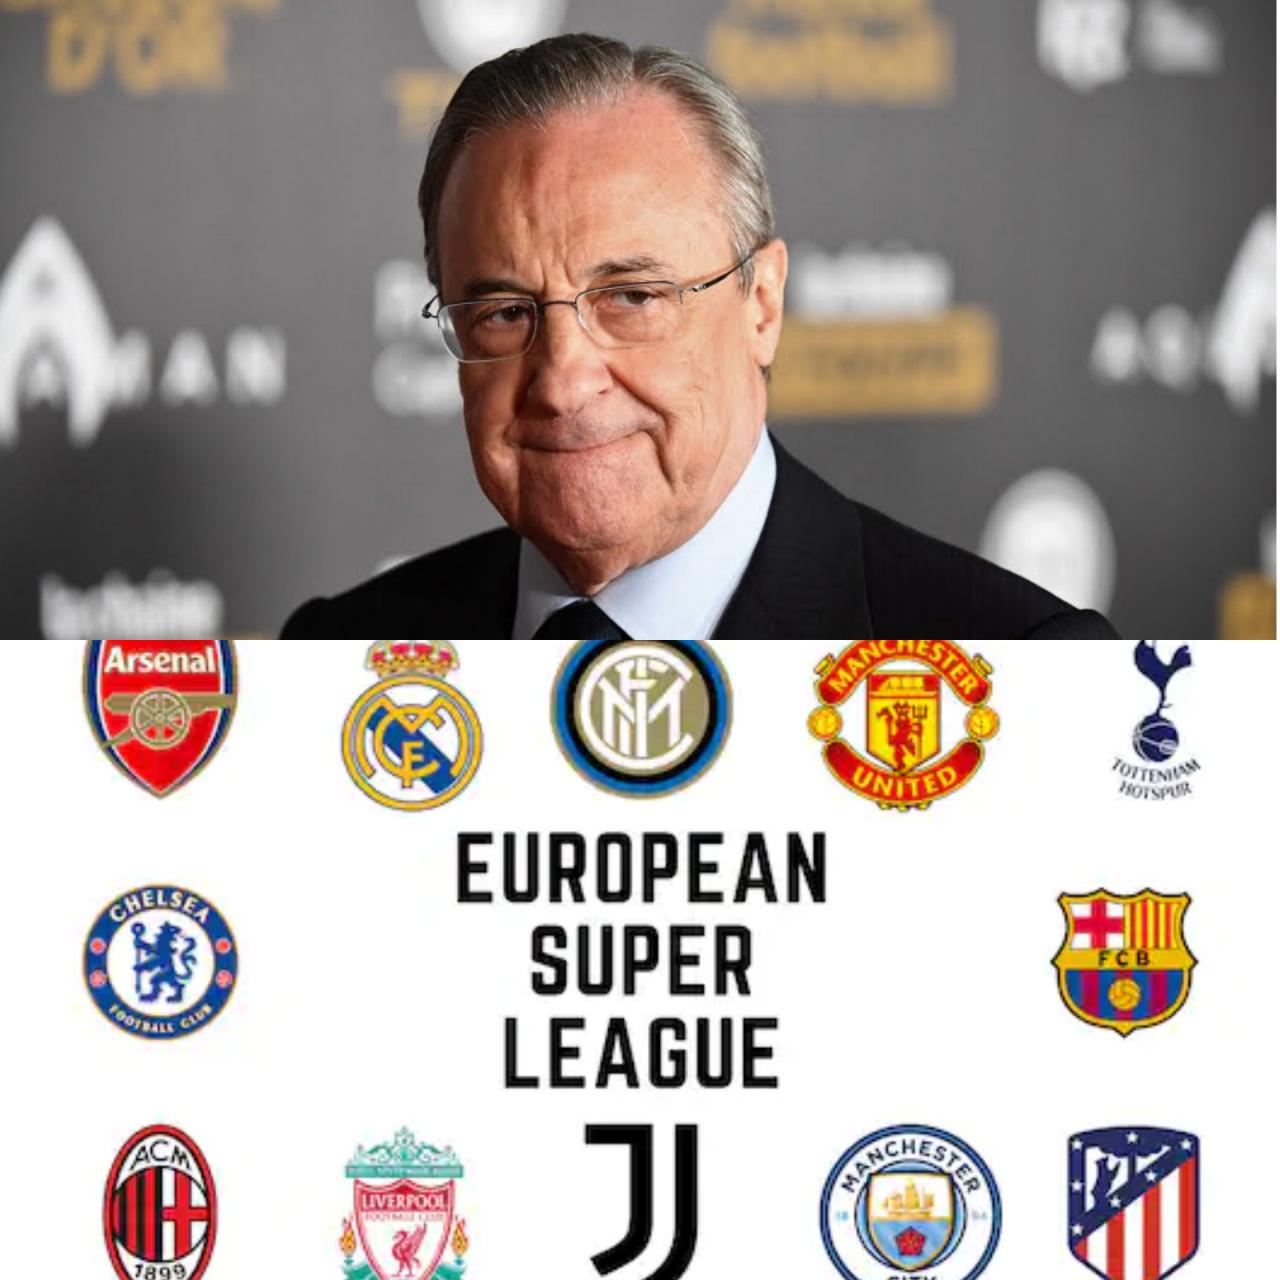 "We know the salary of LeBron James but we don?t know the salary of the UEFA president" - Madrid president Florentino issues strong defence of new Super league